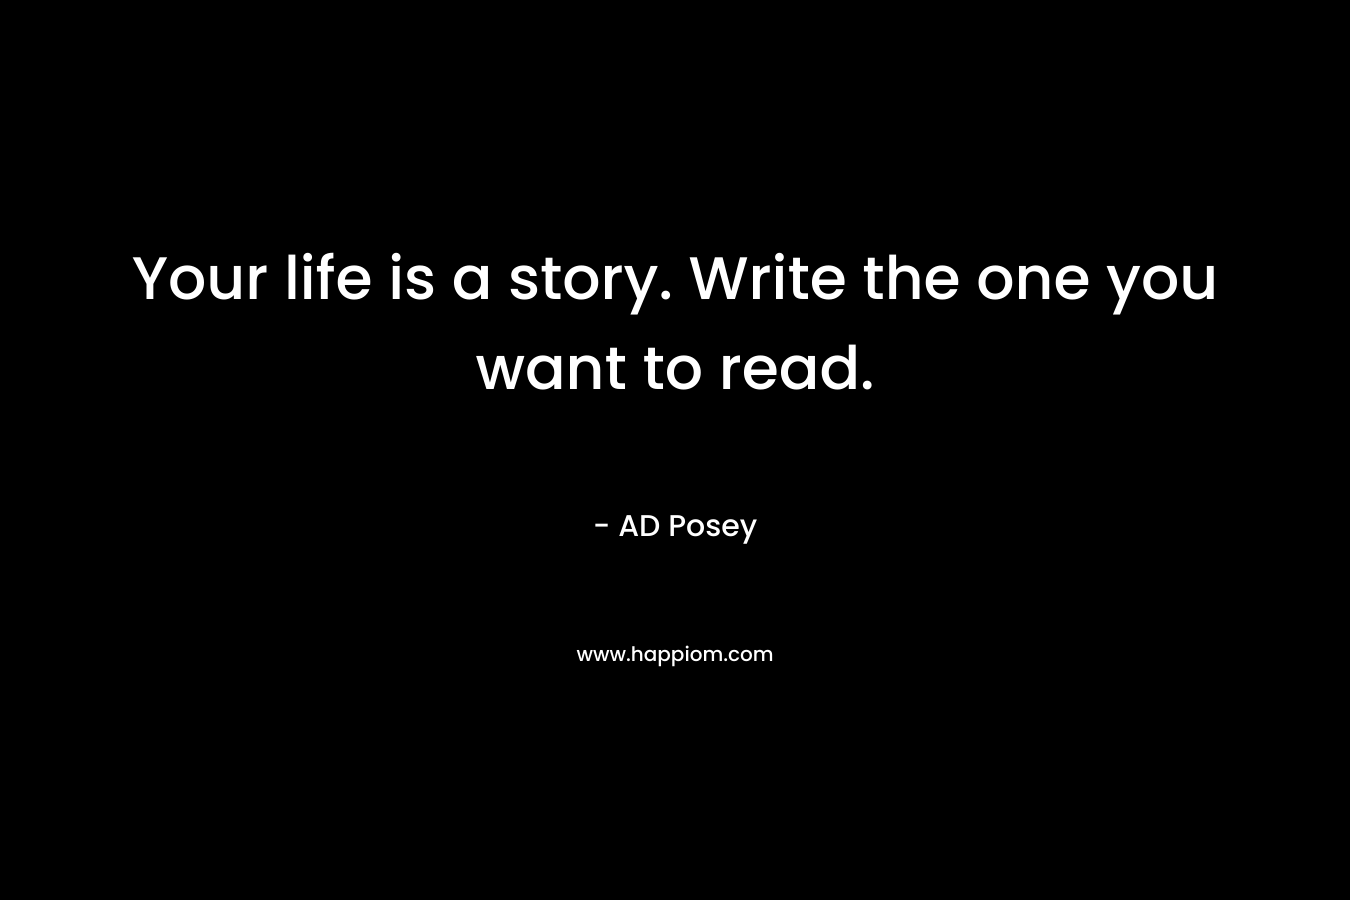 Your life is a story. Write the one you want to read.